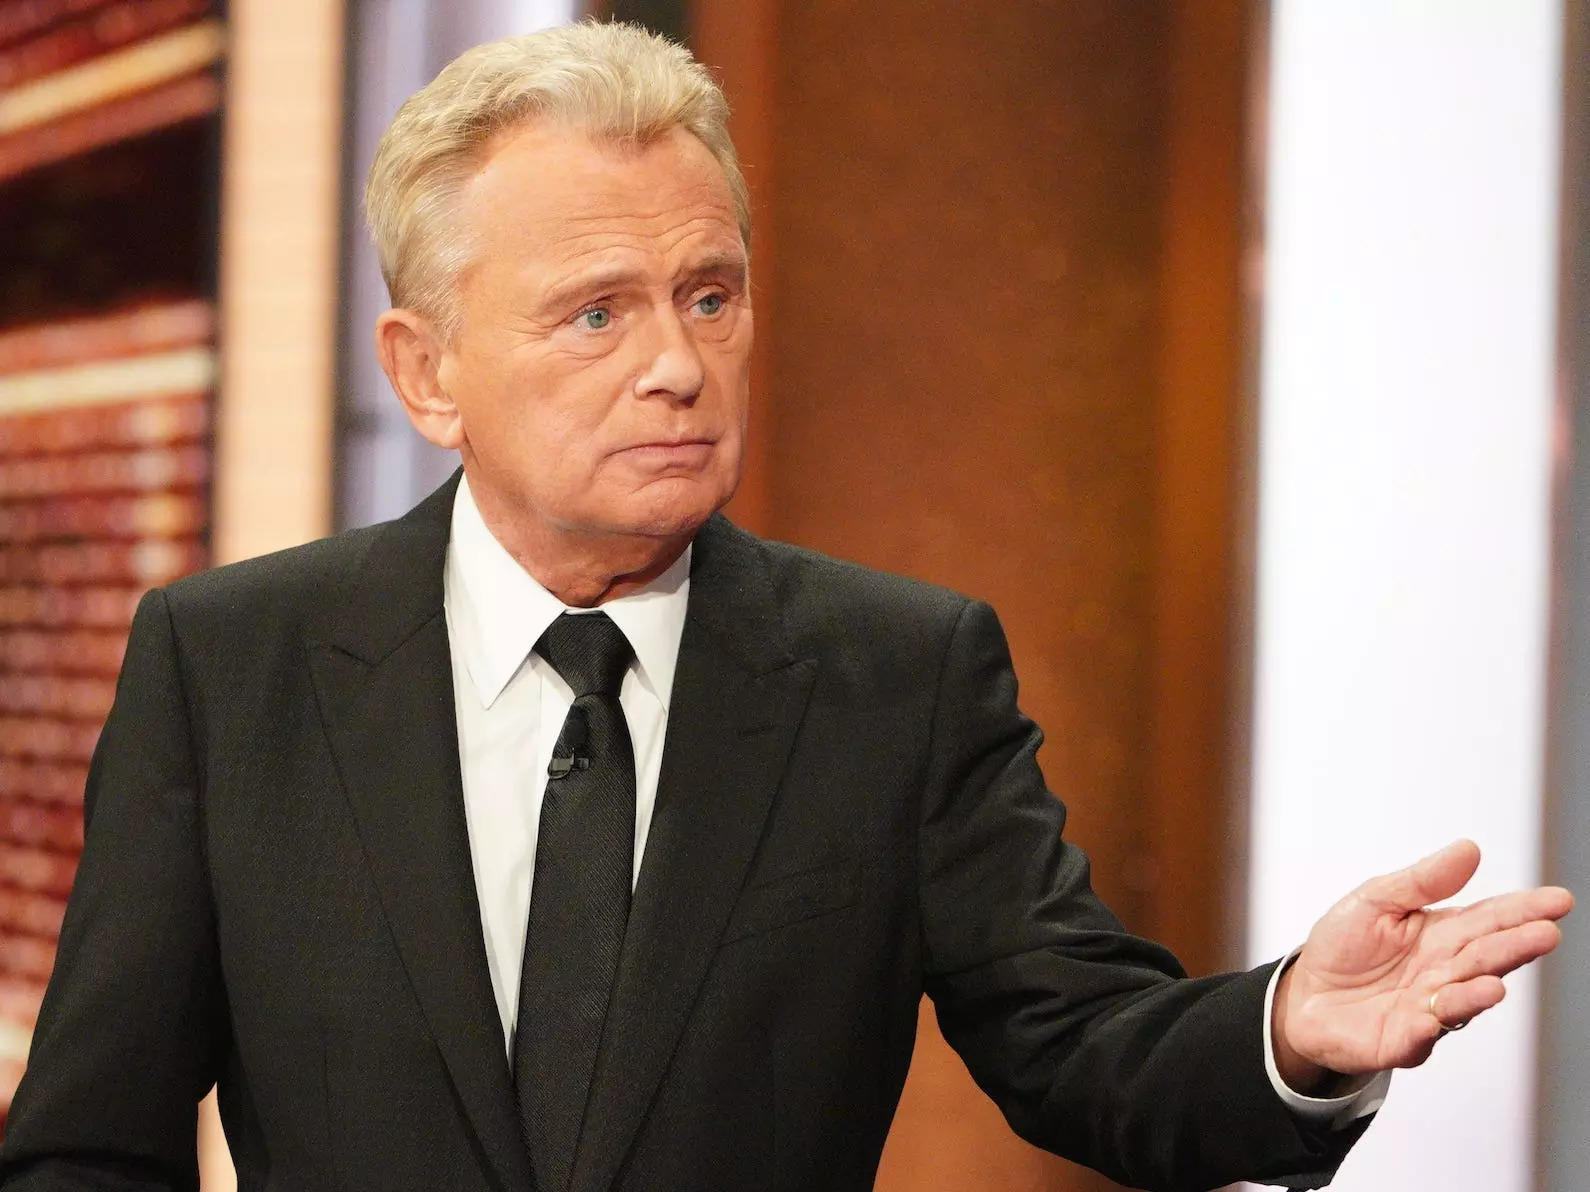 Wheel Of Fortune Host Pat Sajak Defends Contestants Who Were Mocked For Getting A Common